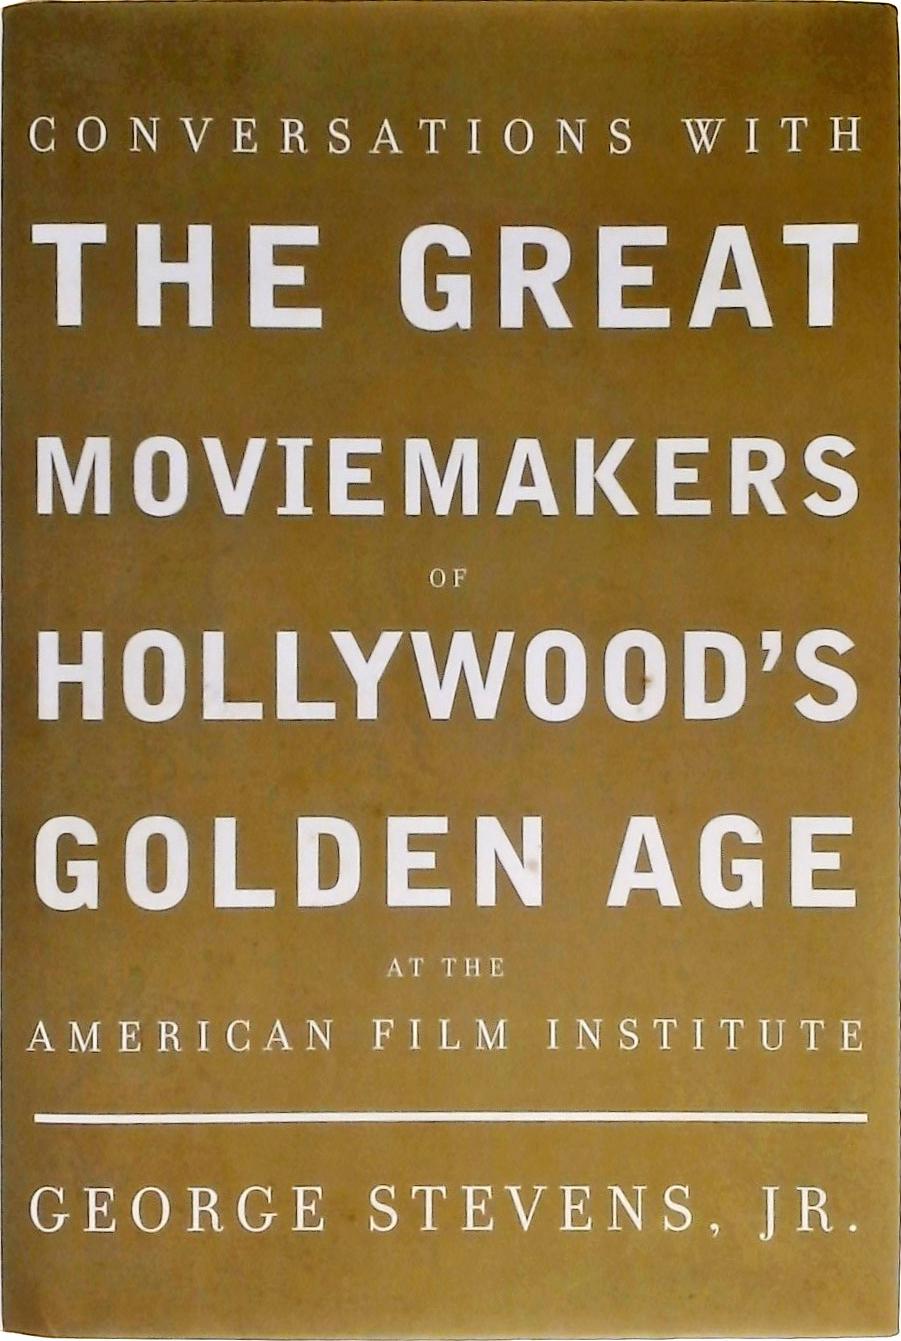 Conversations With The Great Moviemakers Of Hollywood's Golden Age